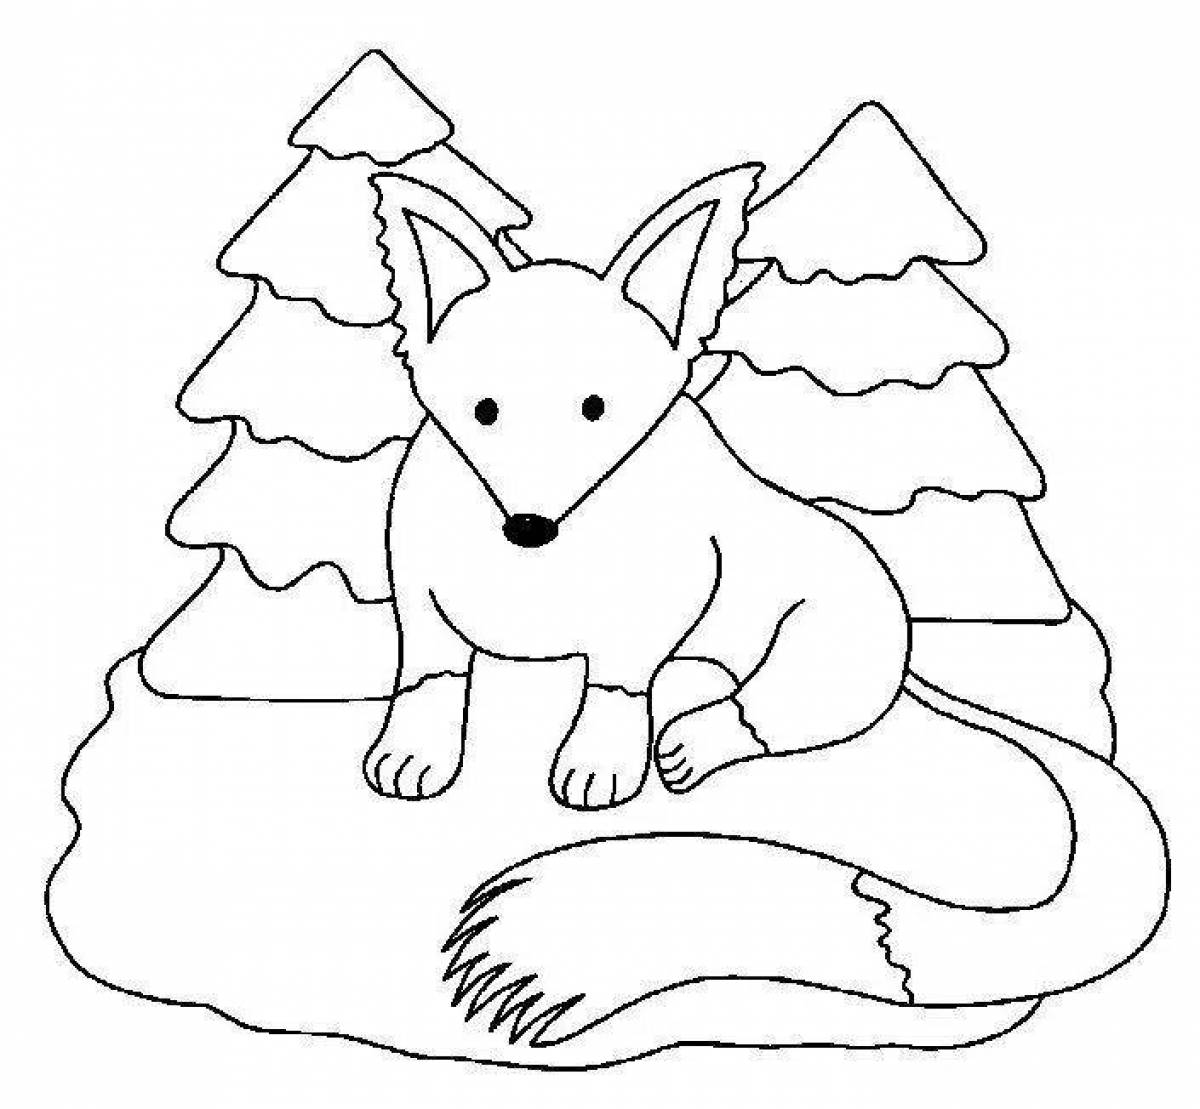 Animated coloring pages animals in the winter forest